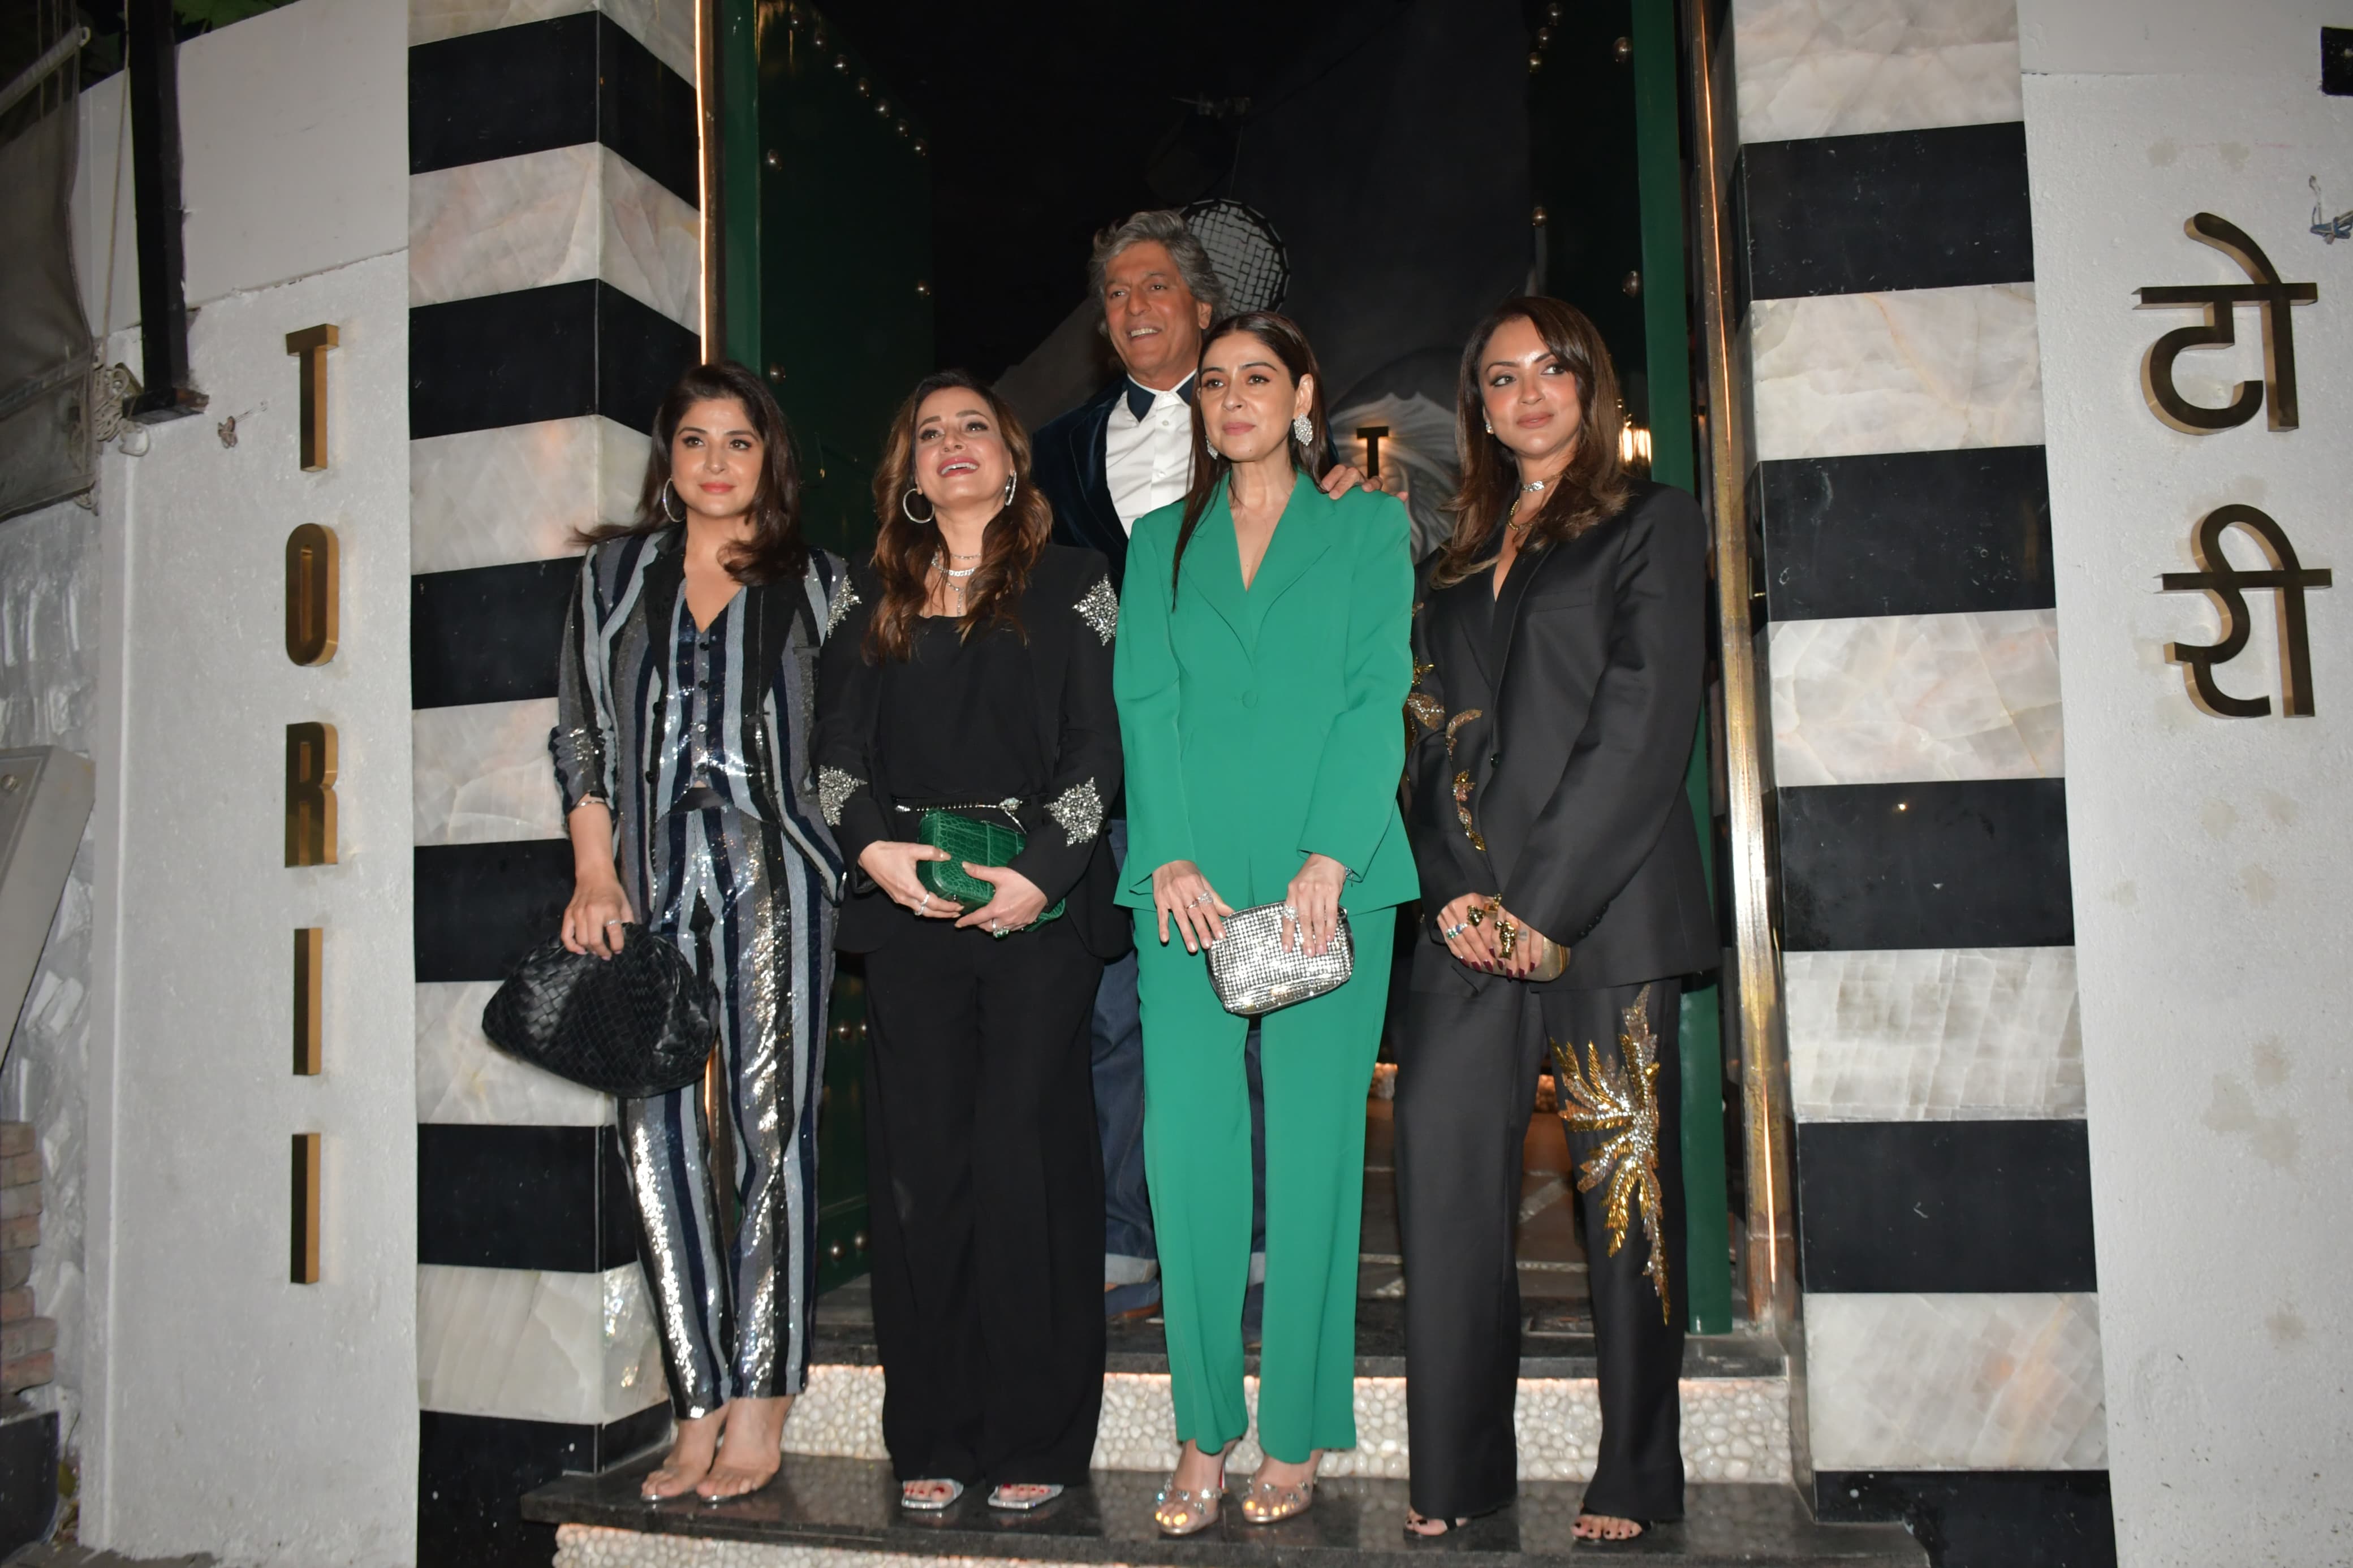 Bhavna Pandey, Maheep Kapoor, Neelam Kothari, Chunky Panday and Seema Kiran Sajdeh posed  together as they attended the events